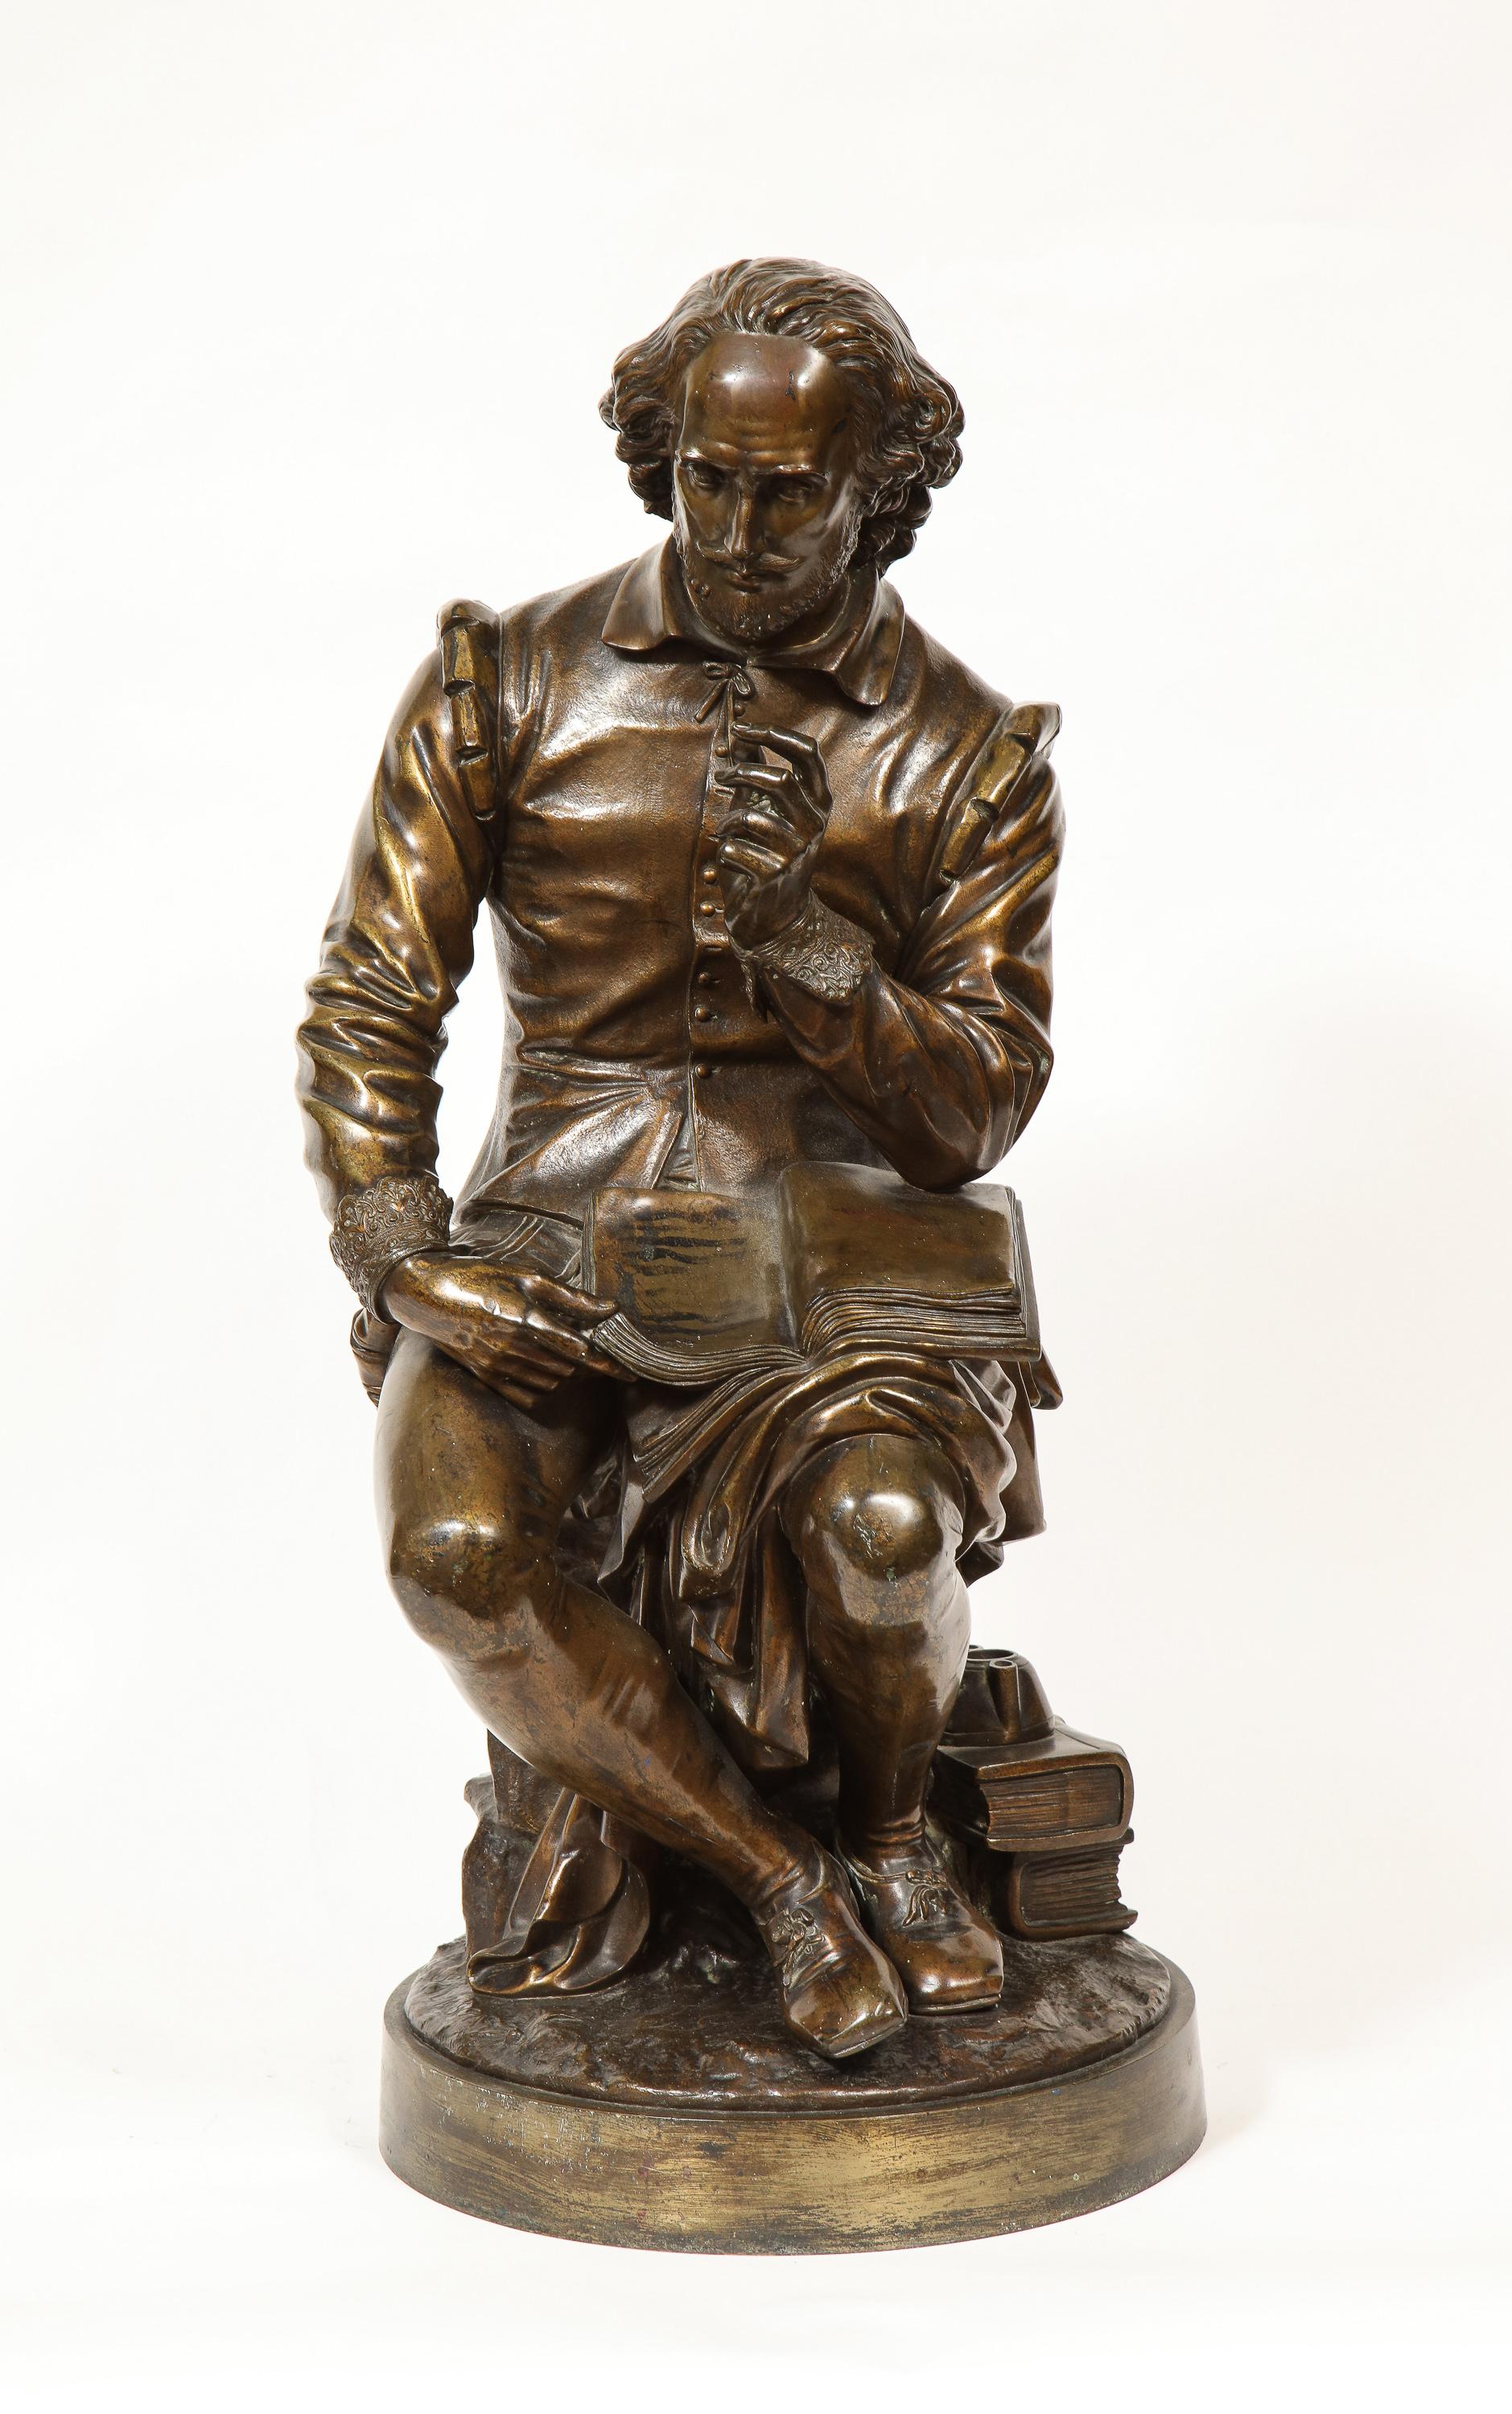 Jean Jules B. Salmson (French, 1823-1902) bronze sculpture of William Shakespeare seated with books, 19th century.  

Very rare sculpture of the famous William Shakespeare. Bronzes of him and especially of this size are hard to find. Perfect fit for